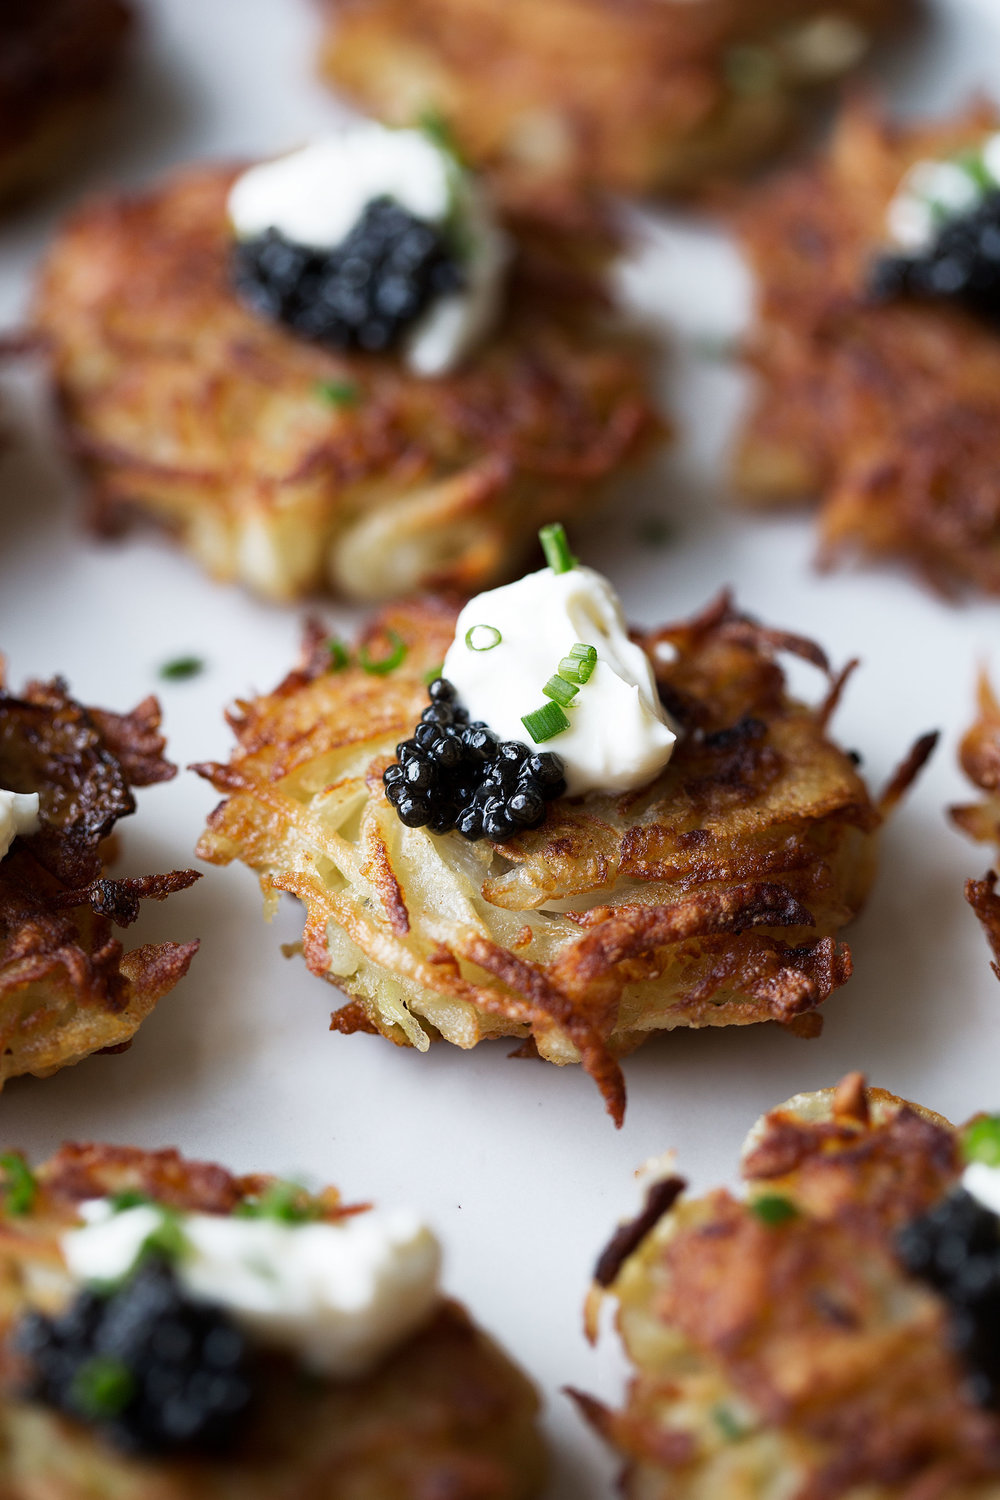 mini bougie latkes with crispy golden brown crust of shredded potatoes topped with caviar, creme fraiche and chives